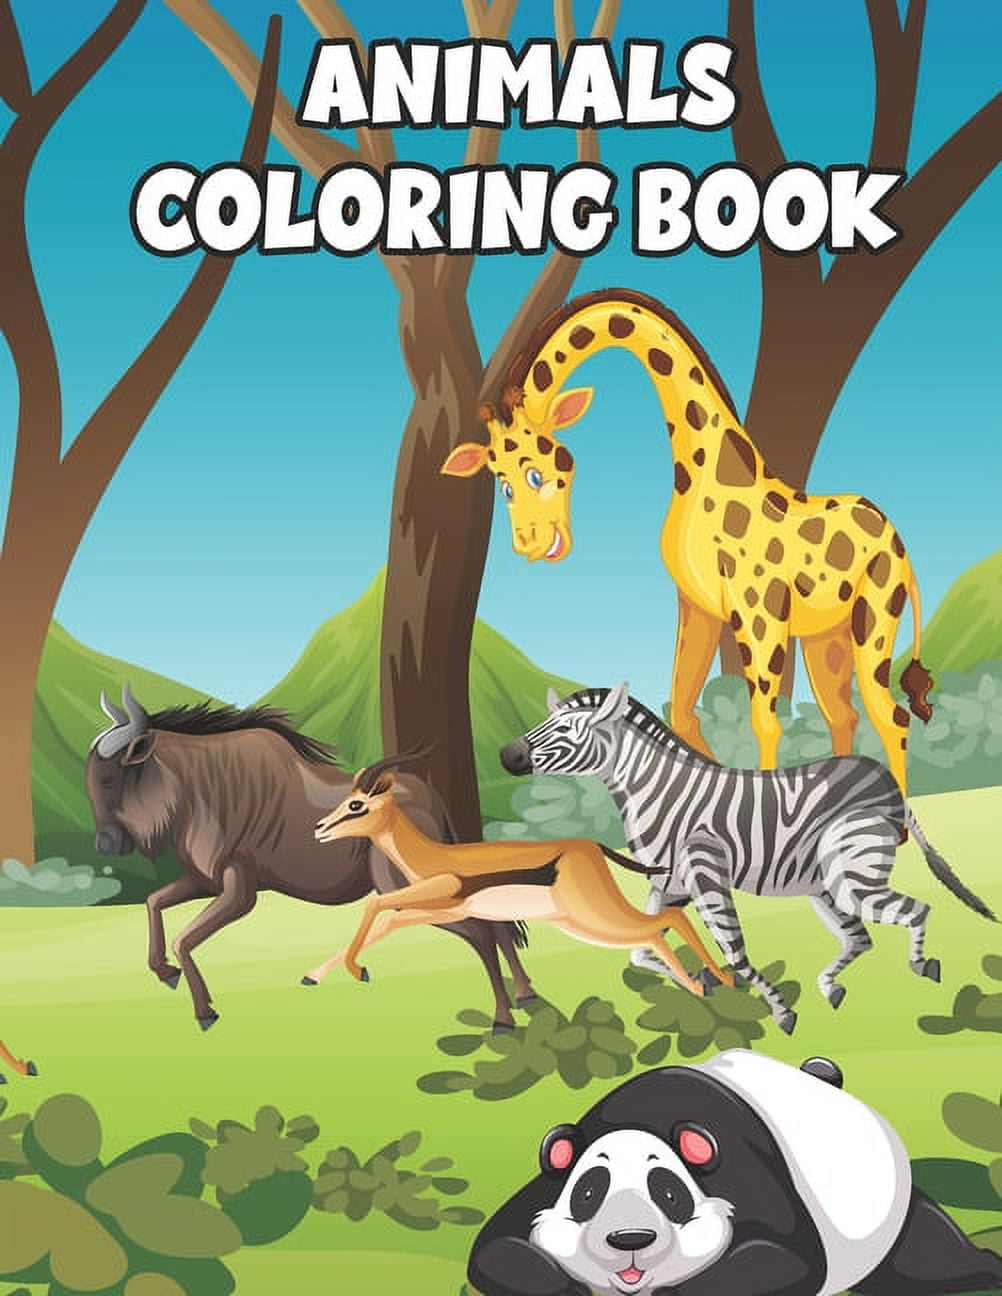 Coloring Books for Kids ages 3-9: Coloring Books For Kids For Girls & Boys  Cool